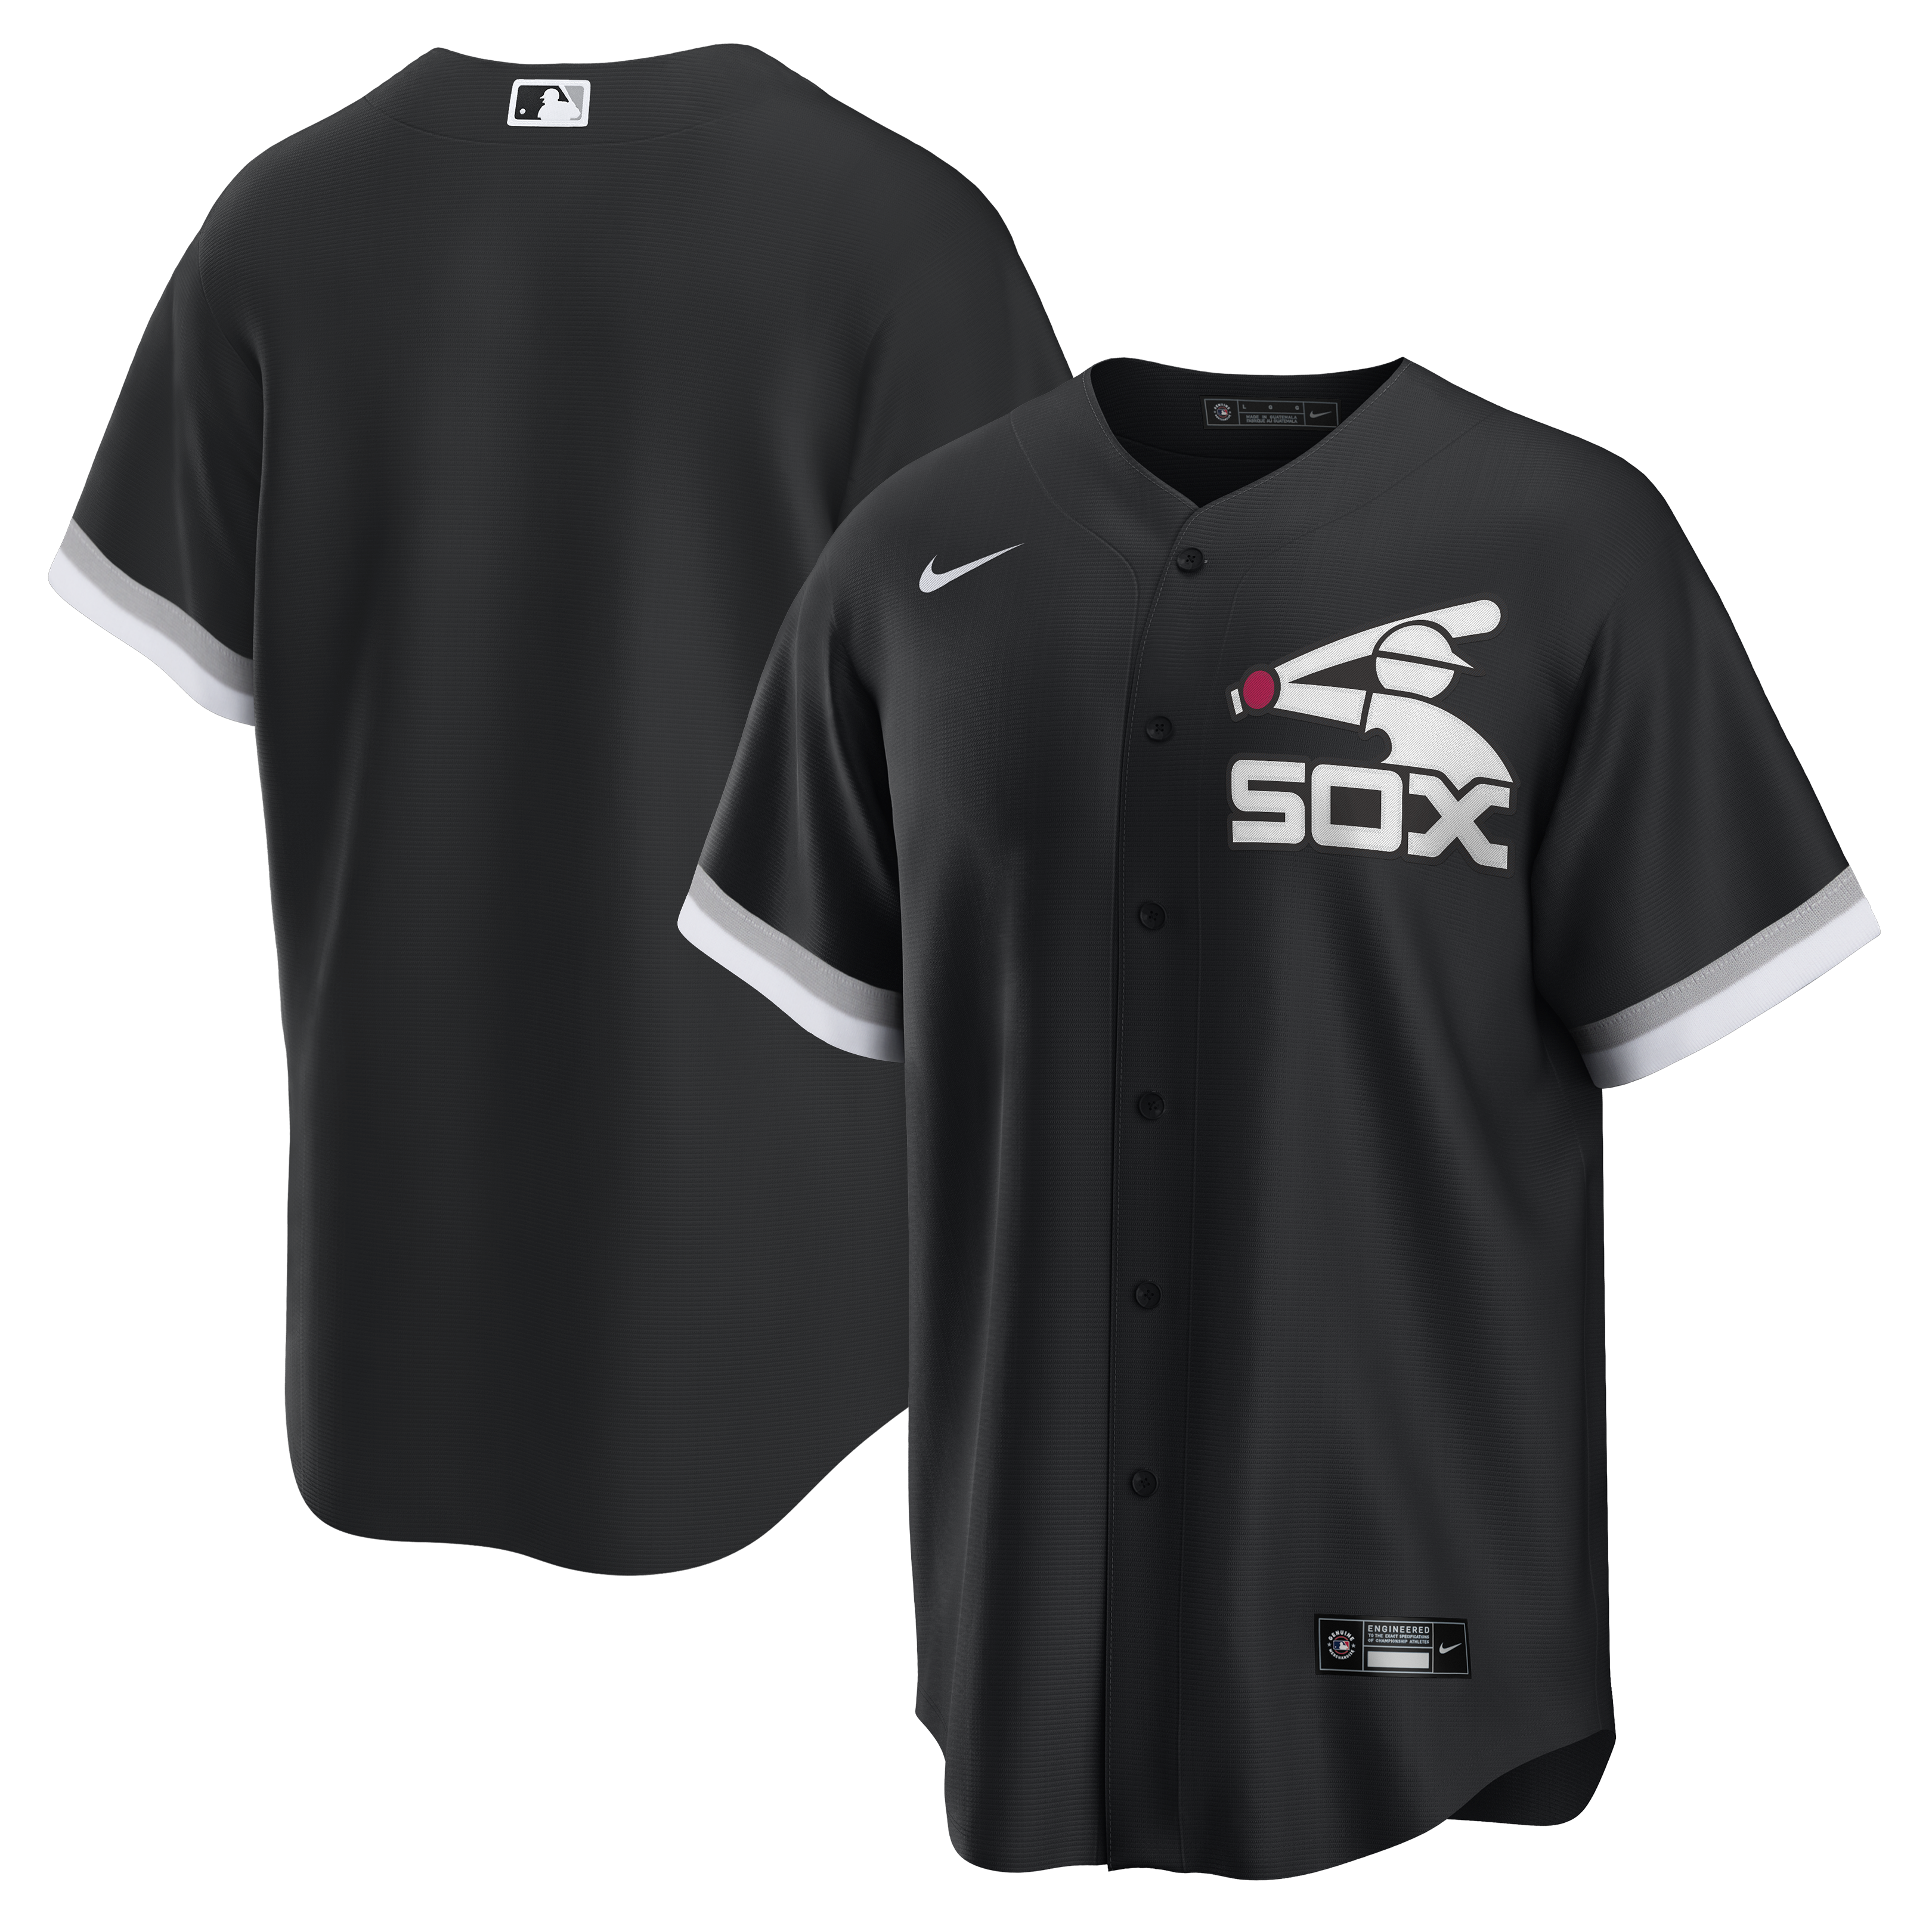 Chicago White Sox 1959 Home Replica Jersey by Nike | Grandstand Ltd.